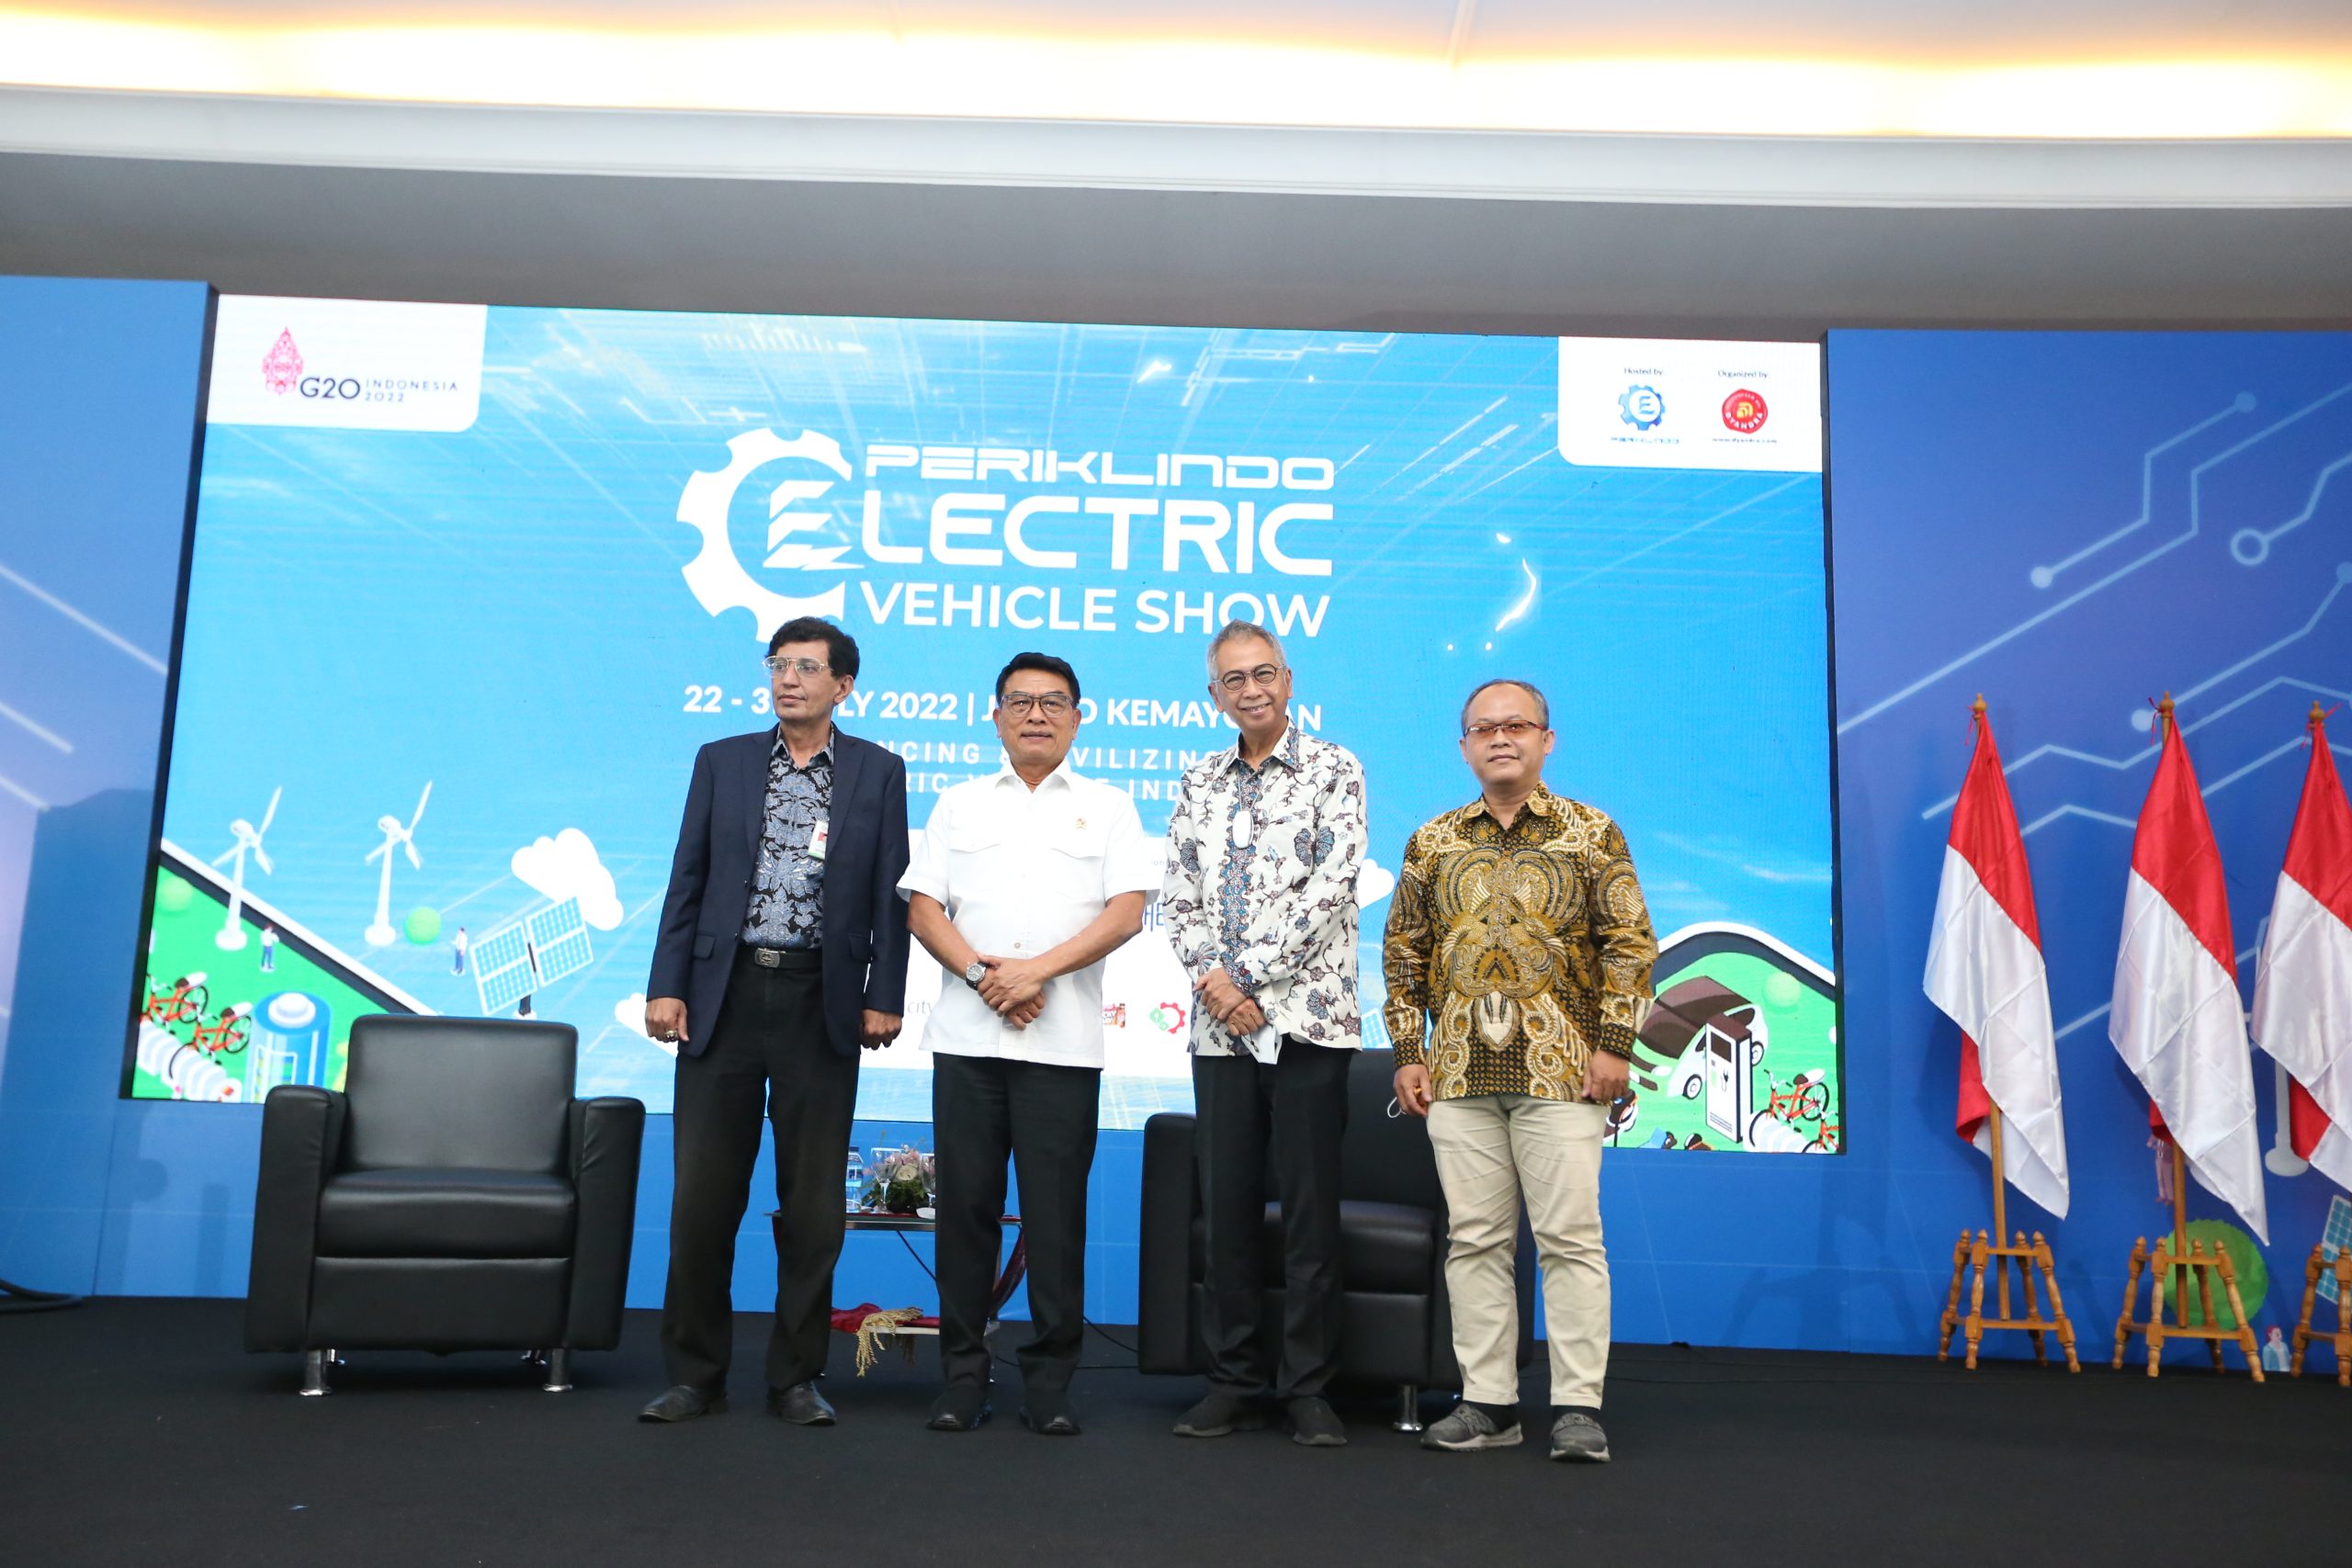 DAY 4 (PERIKLINDO ELECTRIC VEHICLE SHOW 2022)